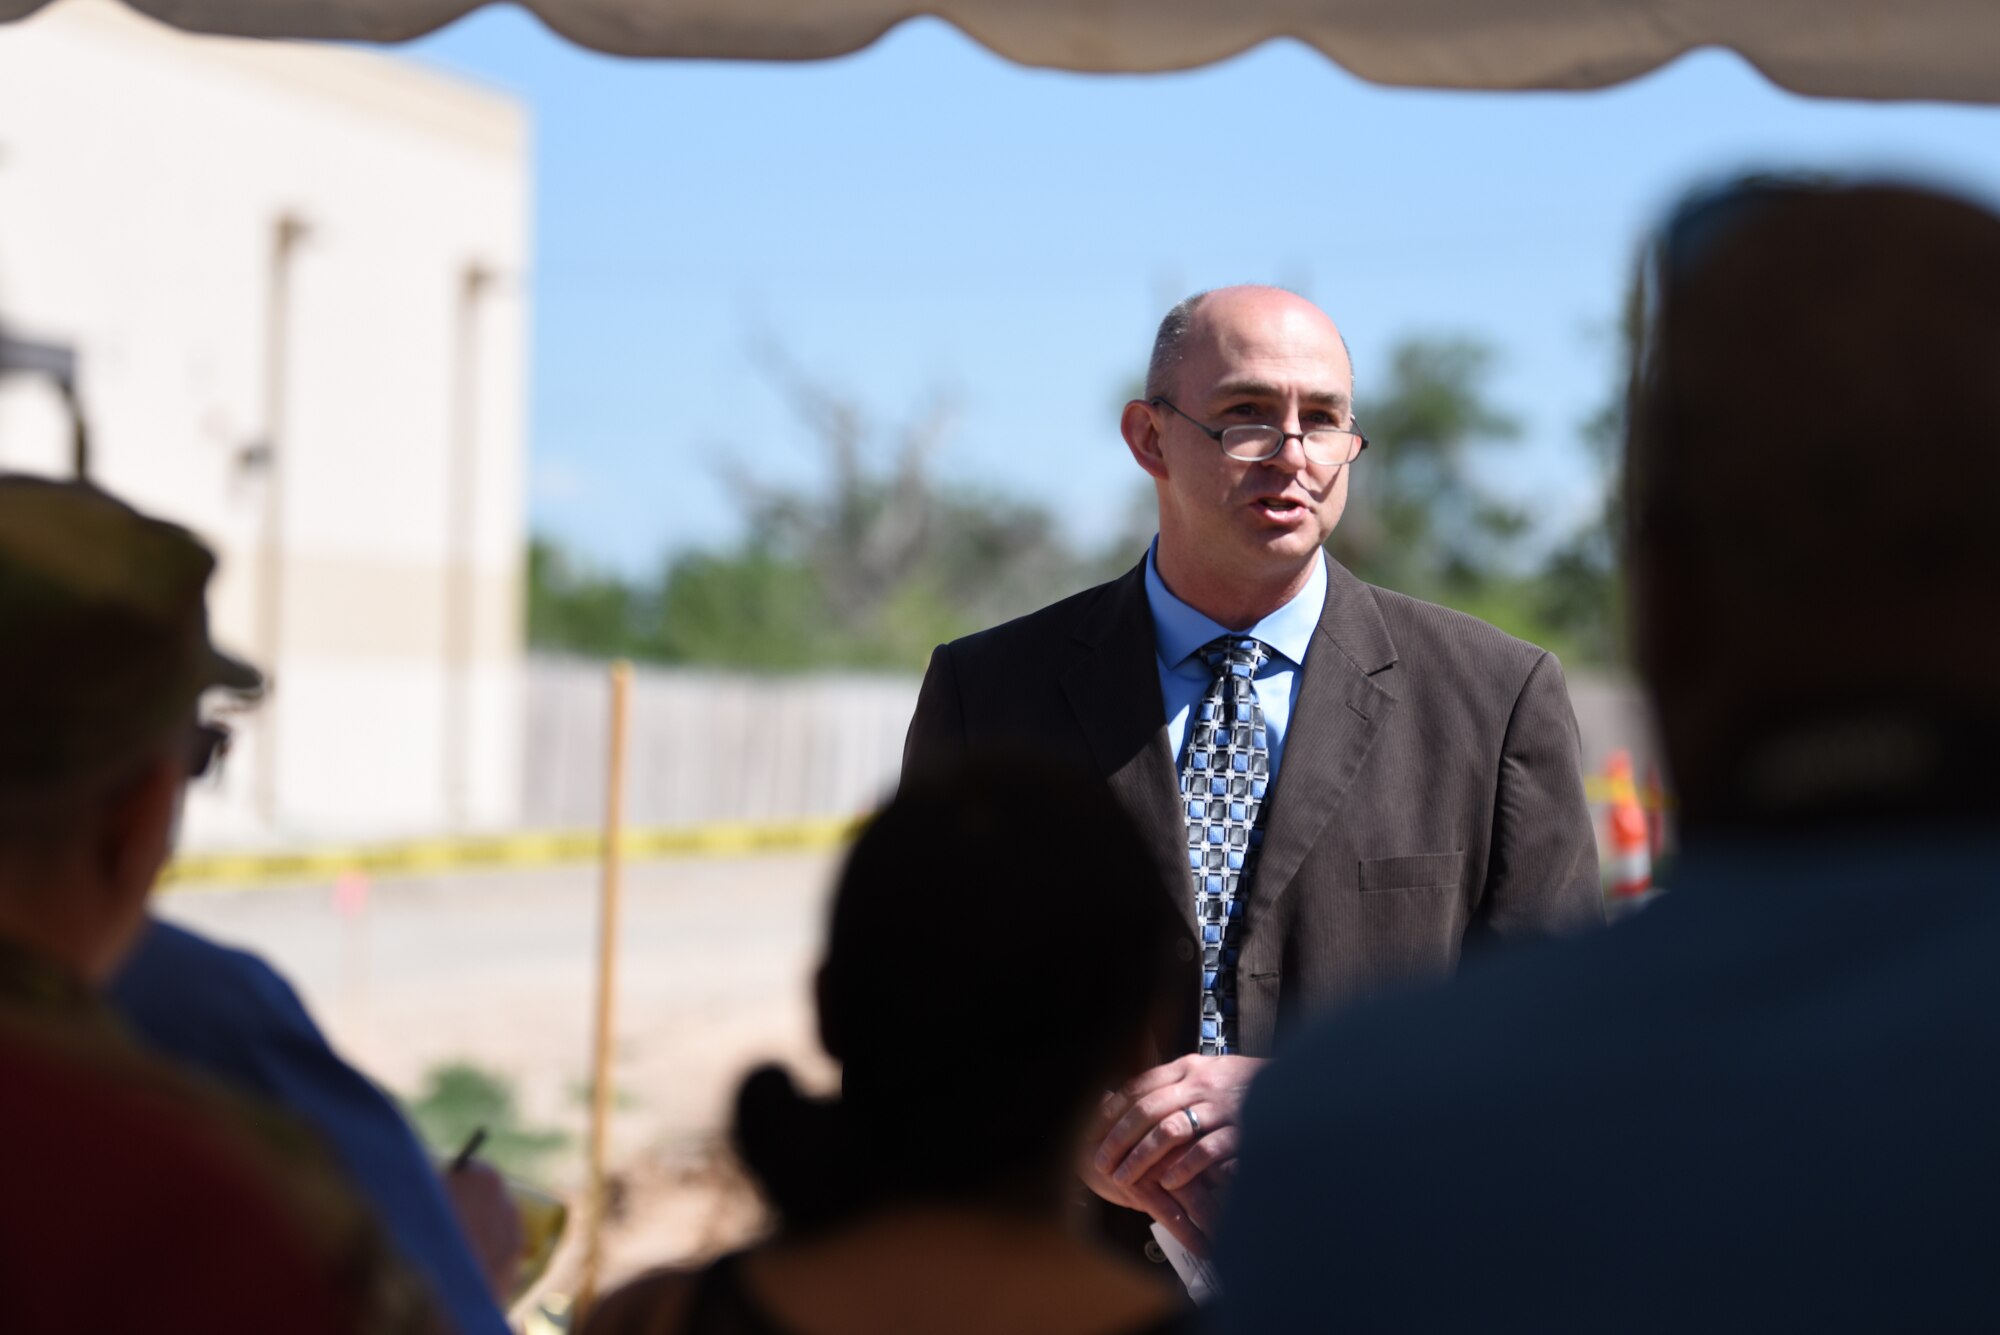 Brian Engberg, Air Force Research Laboratory Space Control Technologies Branch chief, speaks at a groundbreaking ceremony at Kirtland Air Force Base, N.M., June 6, 2019. At the ceremony, construction officially began on the Space Control Laboratory, a new facility that will have 26,000 square feet of laboratory, office and administrative space. (U.S. Air Force photo by Senior Airman Eli Chevalier)